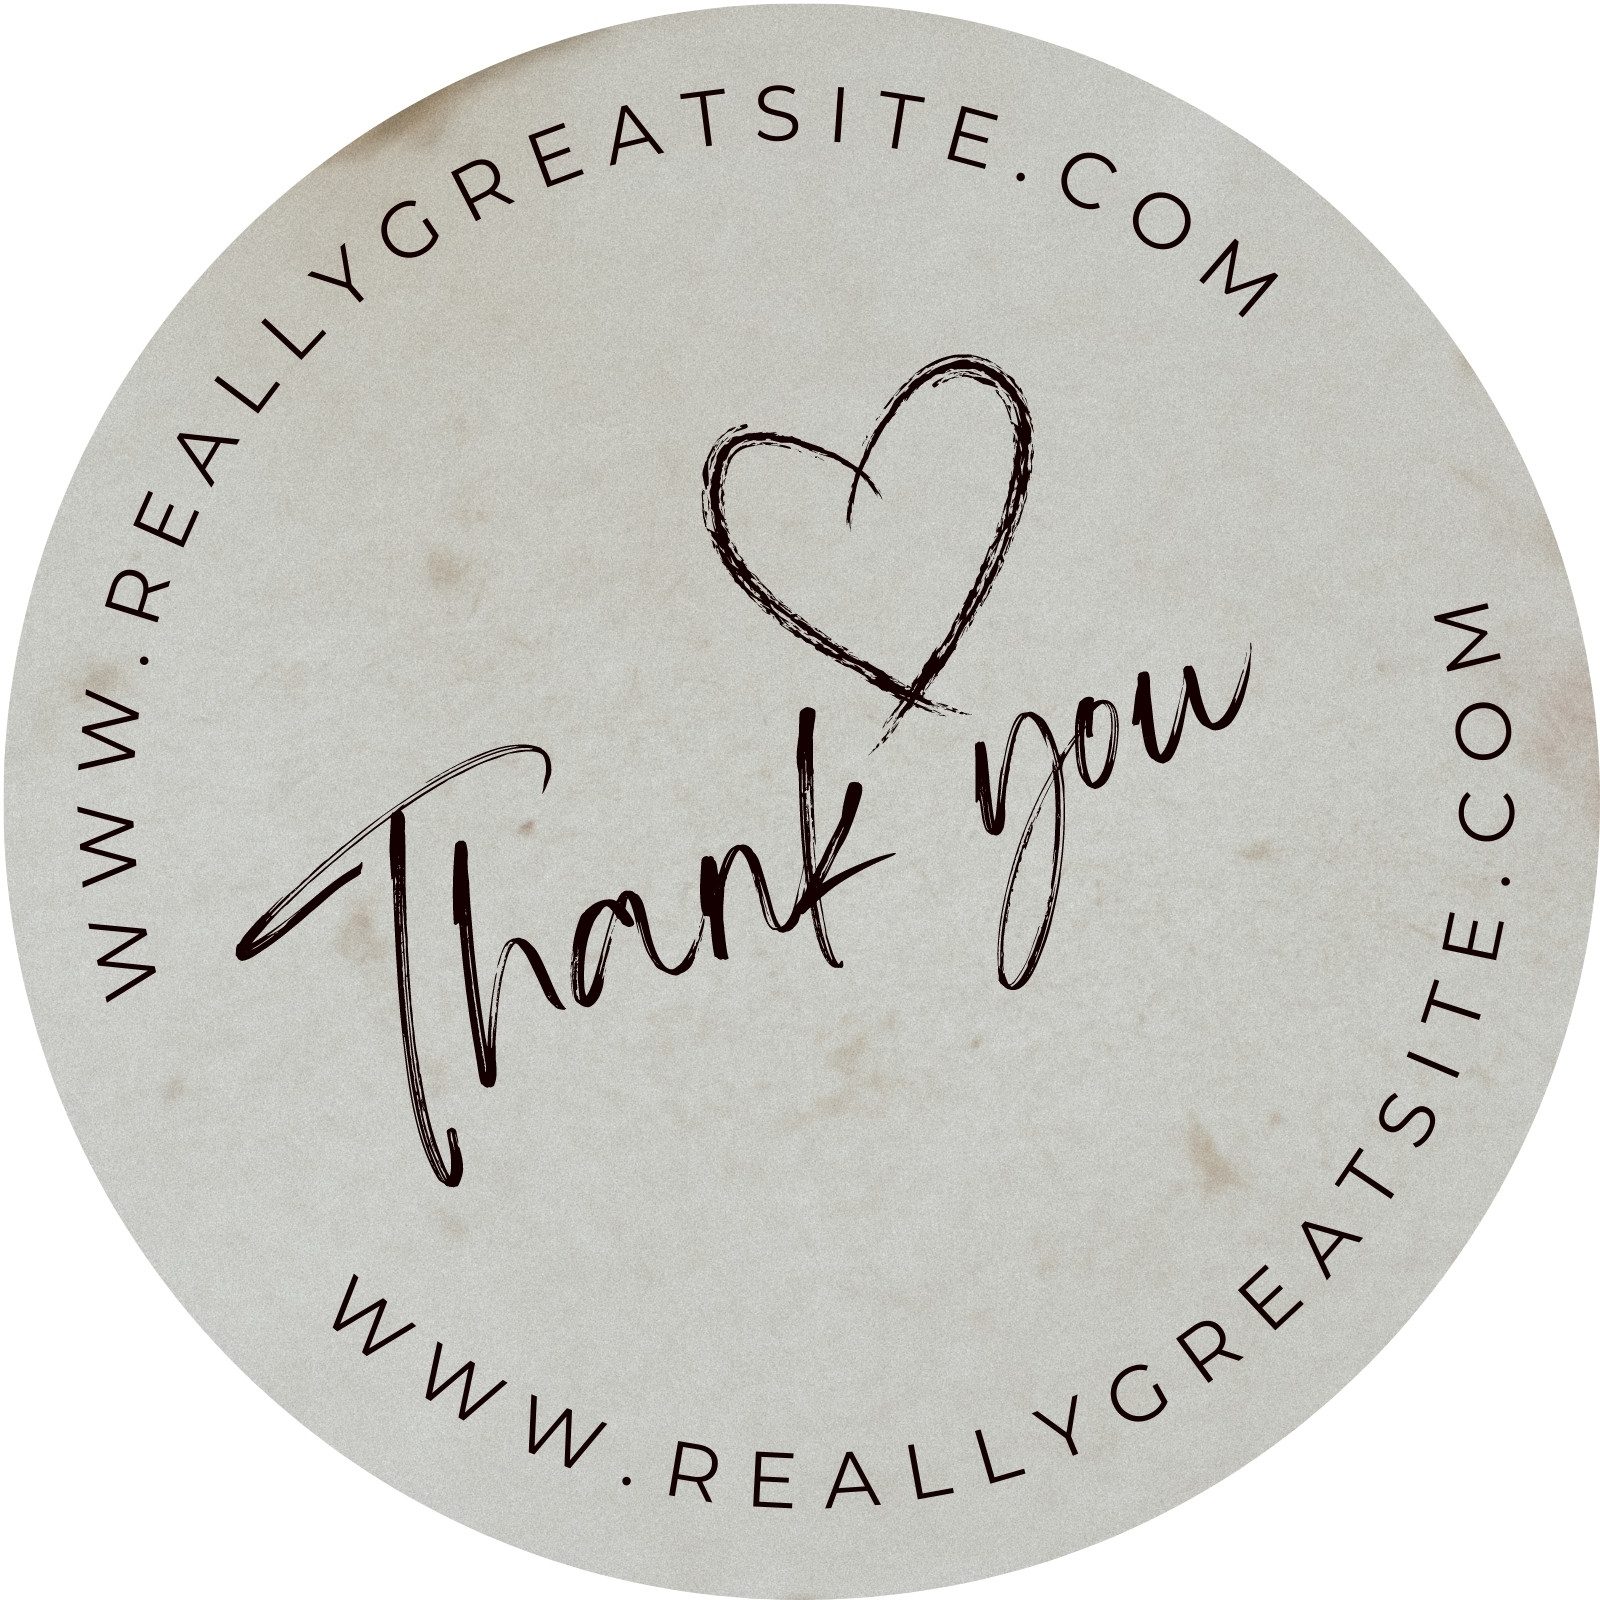 Free printable business thank you stickers